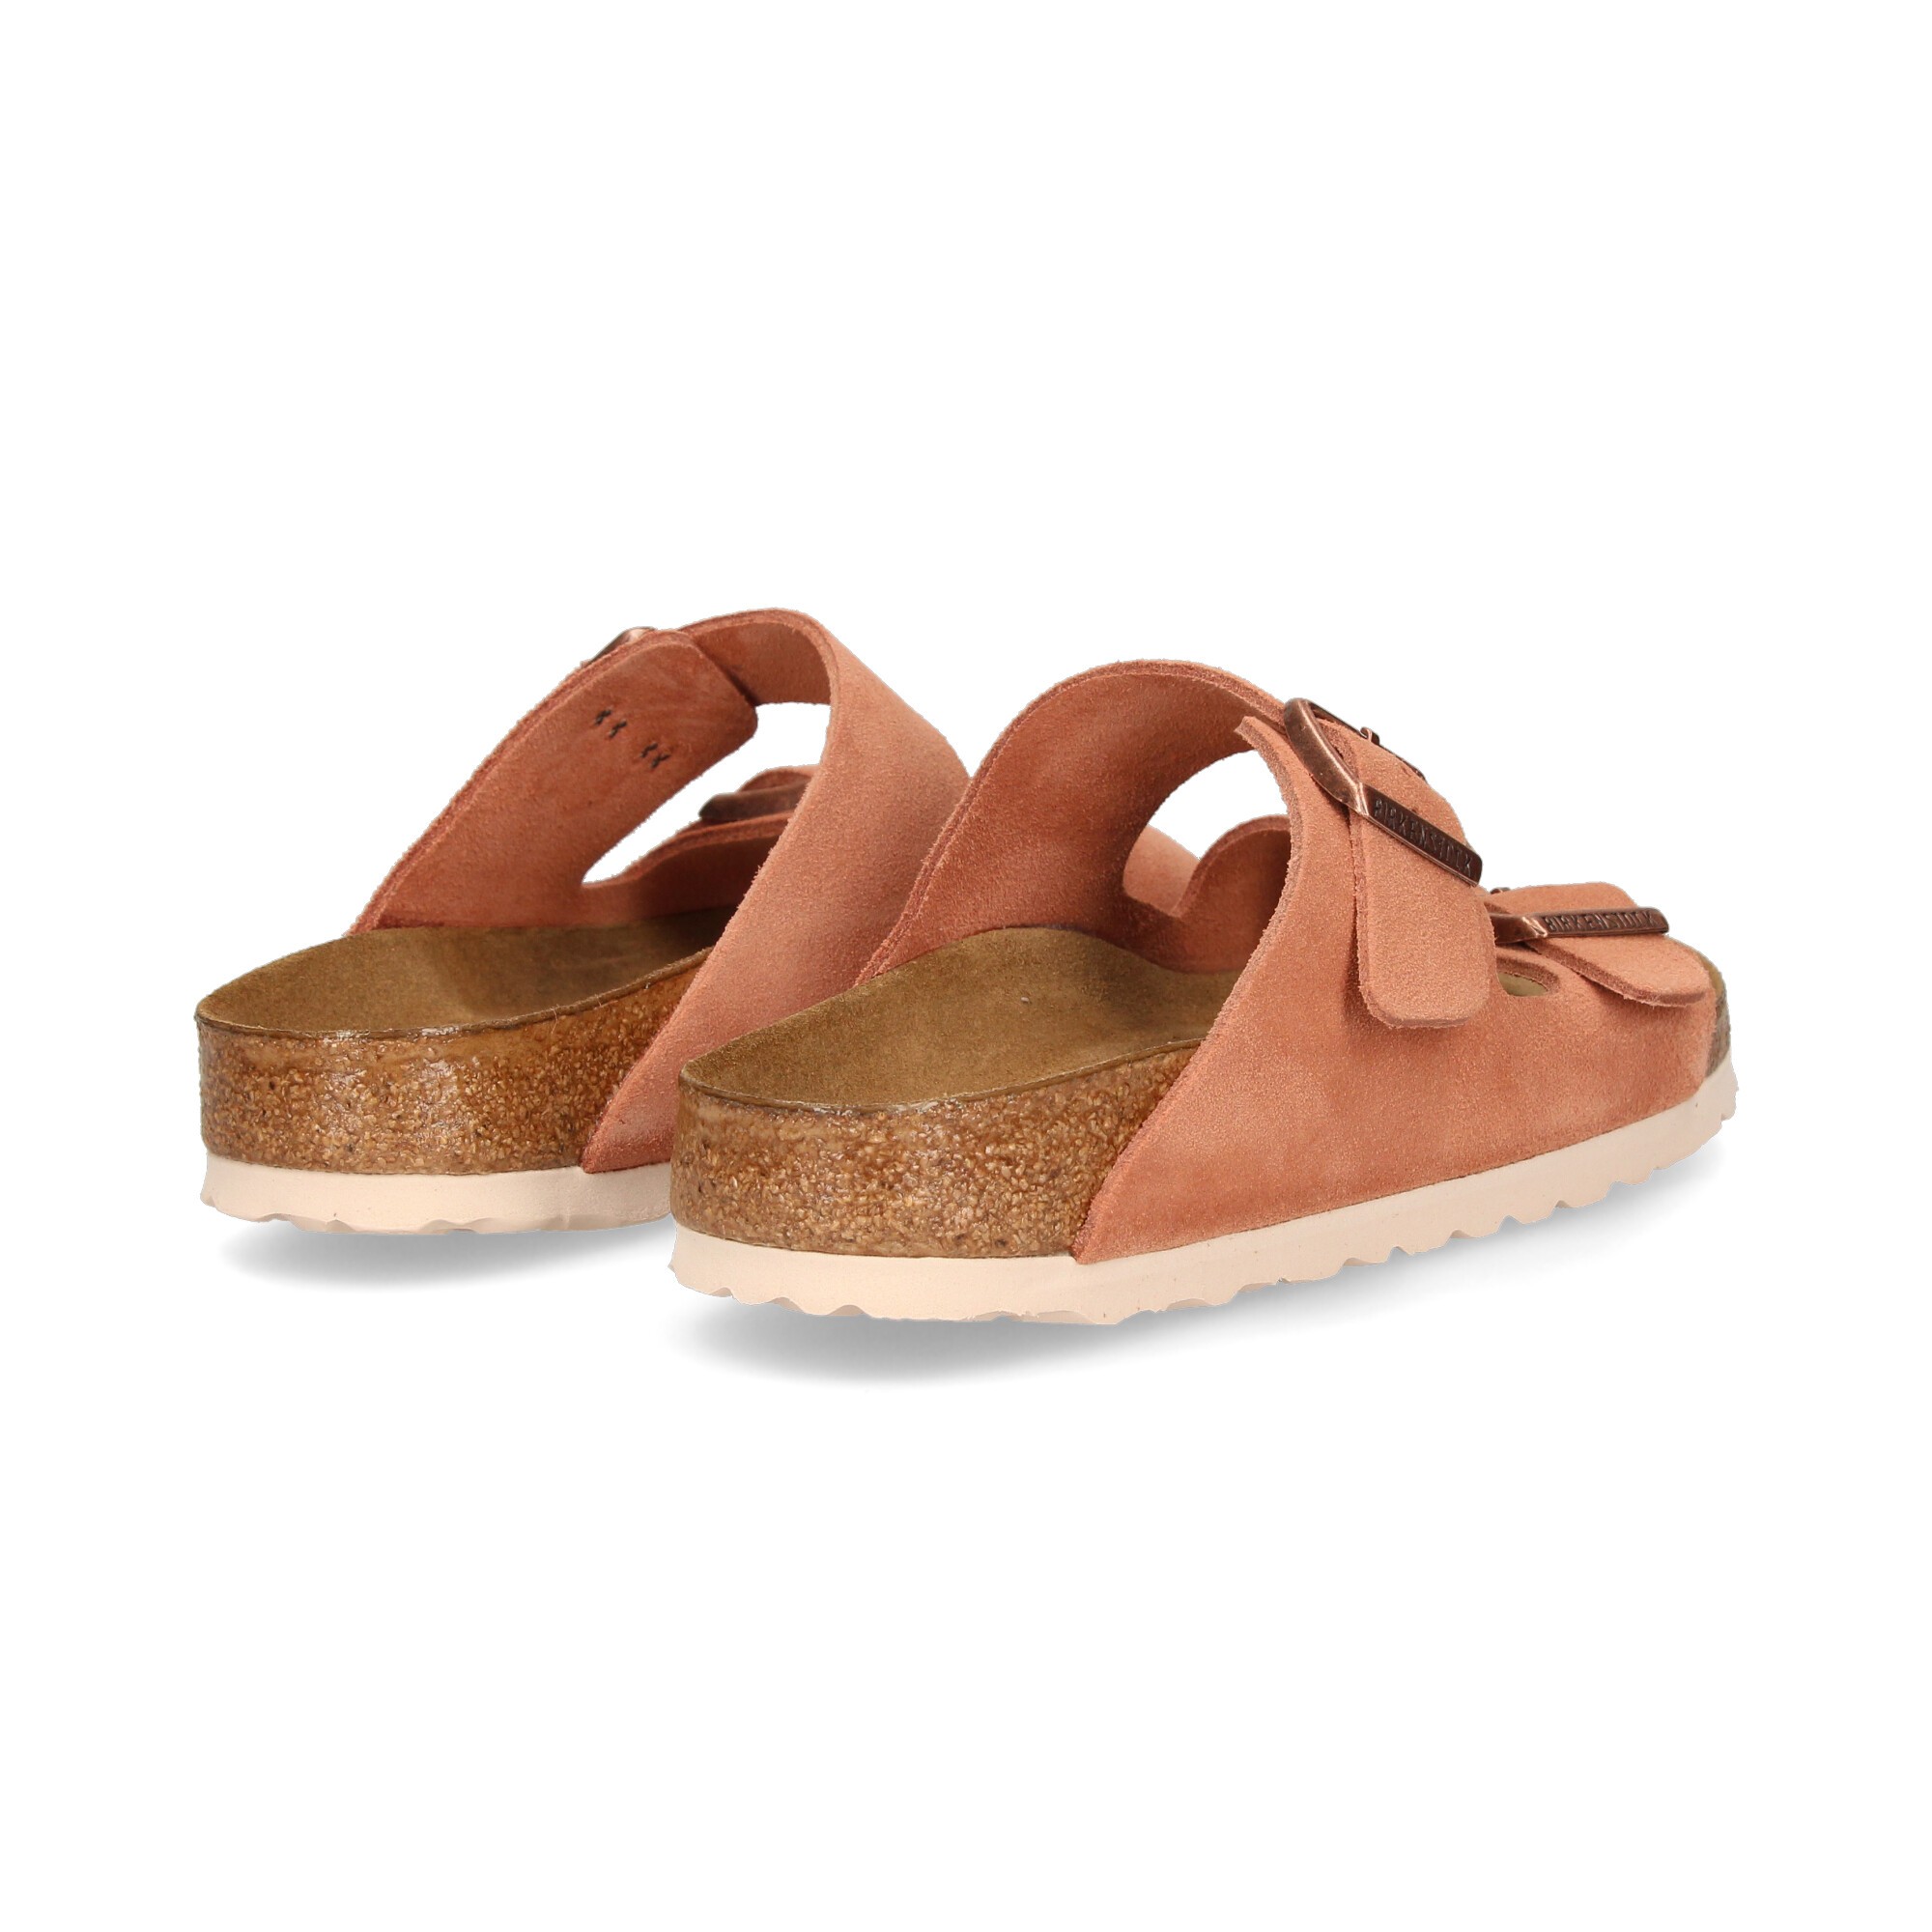 sandal-2-brown-suede-leather-straps